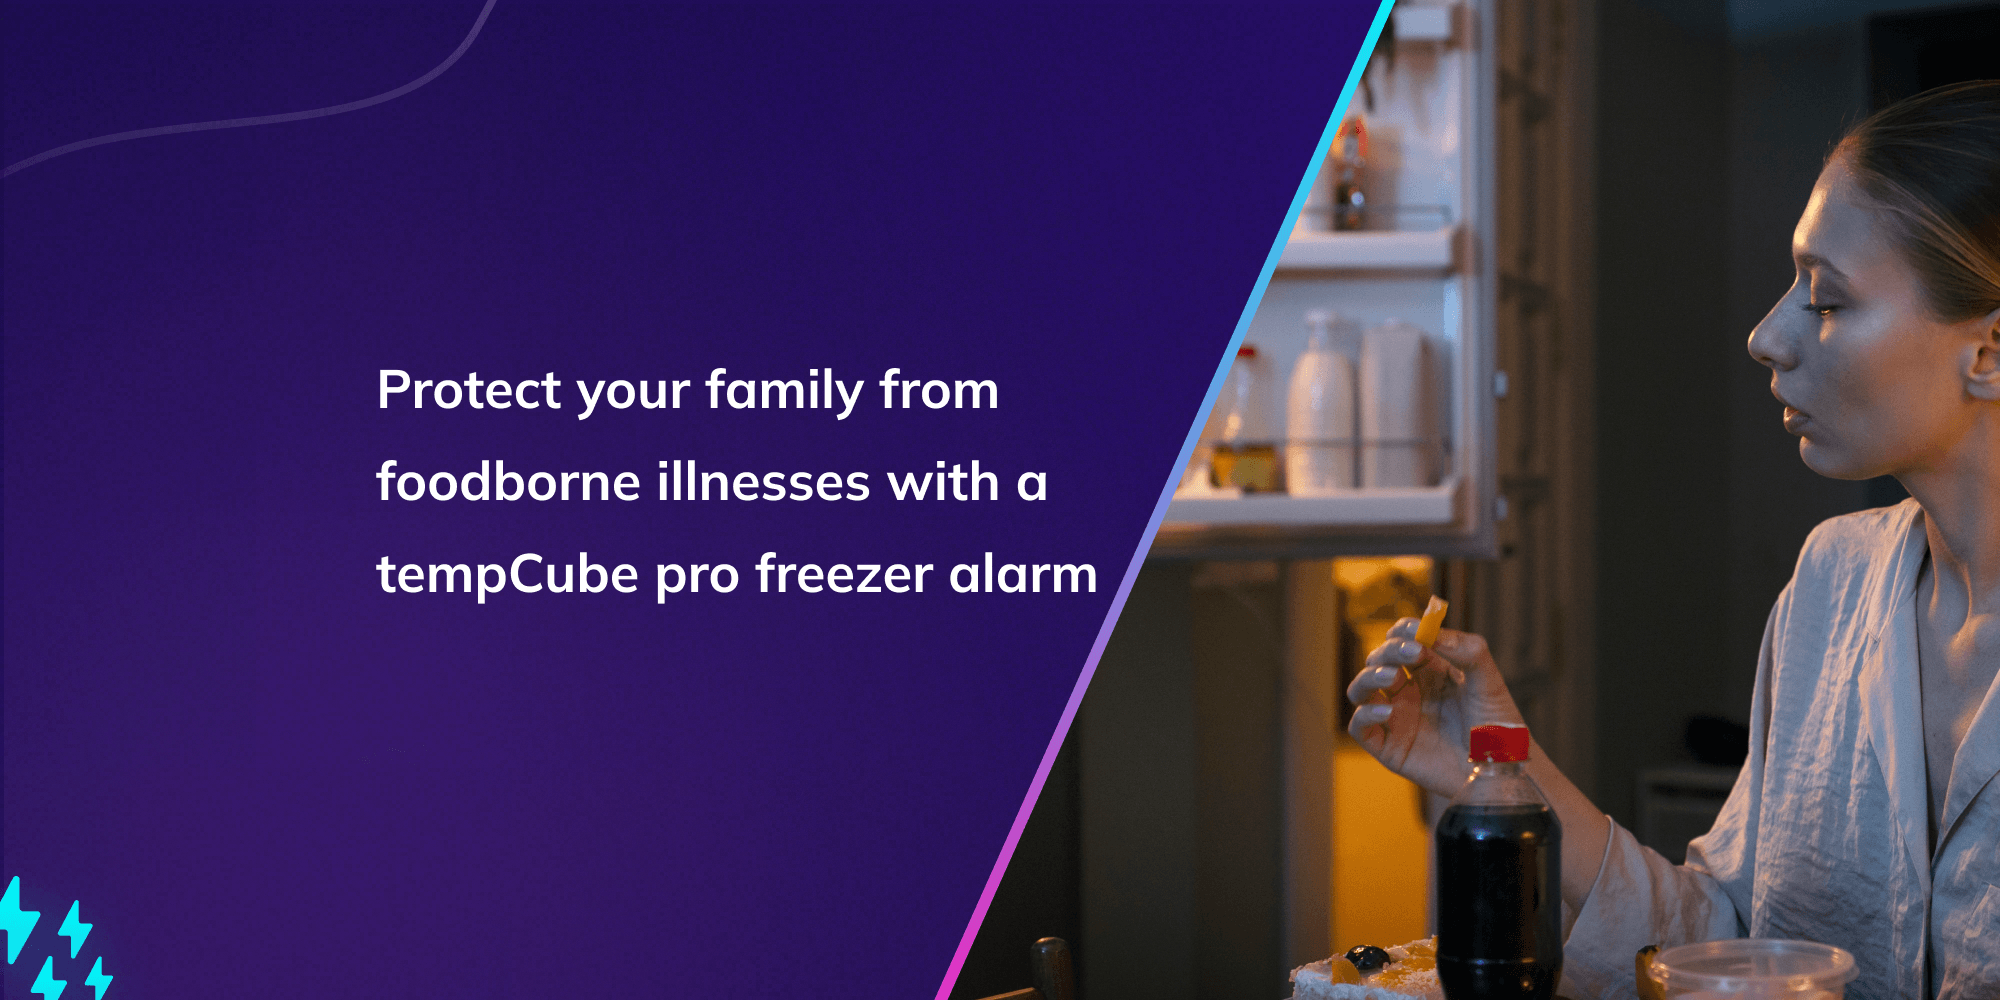 Protect your family from foodborne illnesses with a tempCube pro freezer alarm